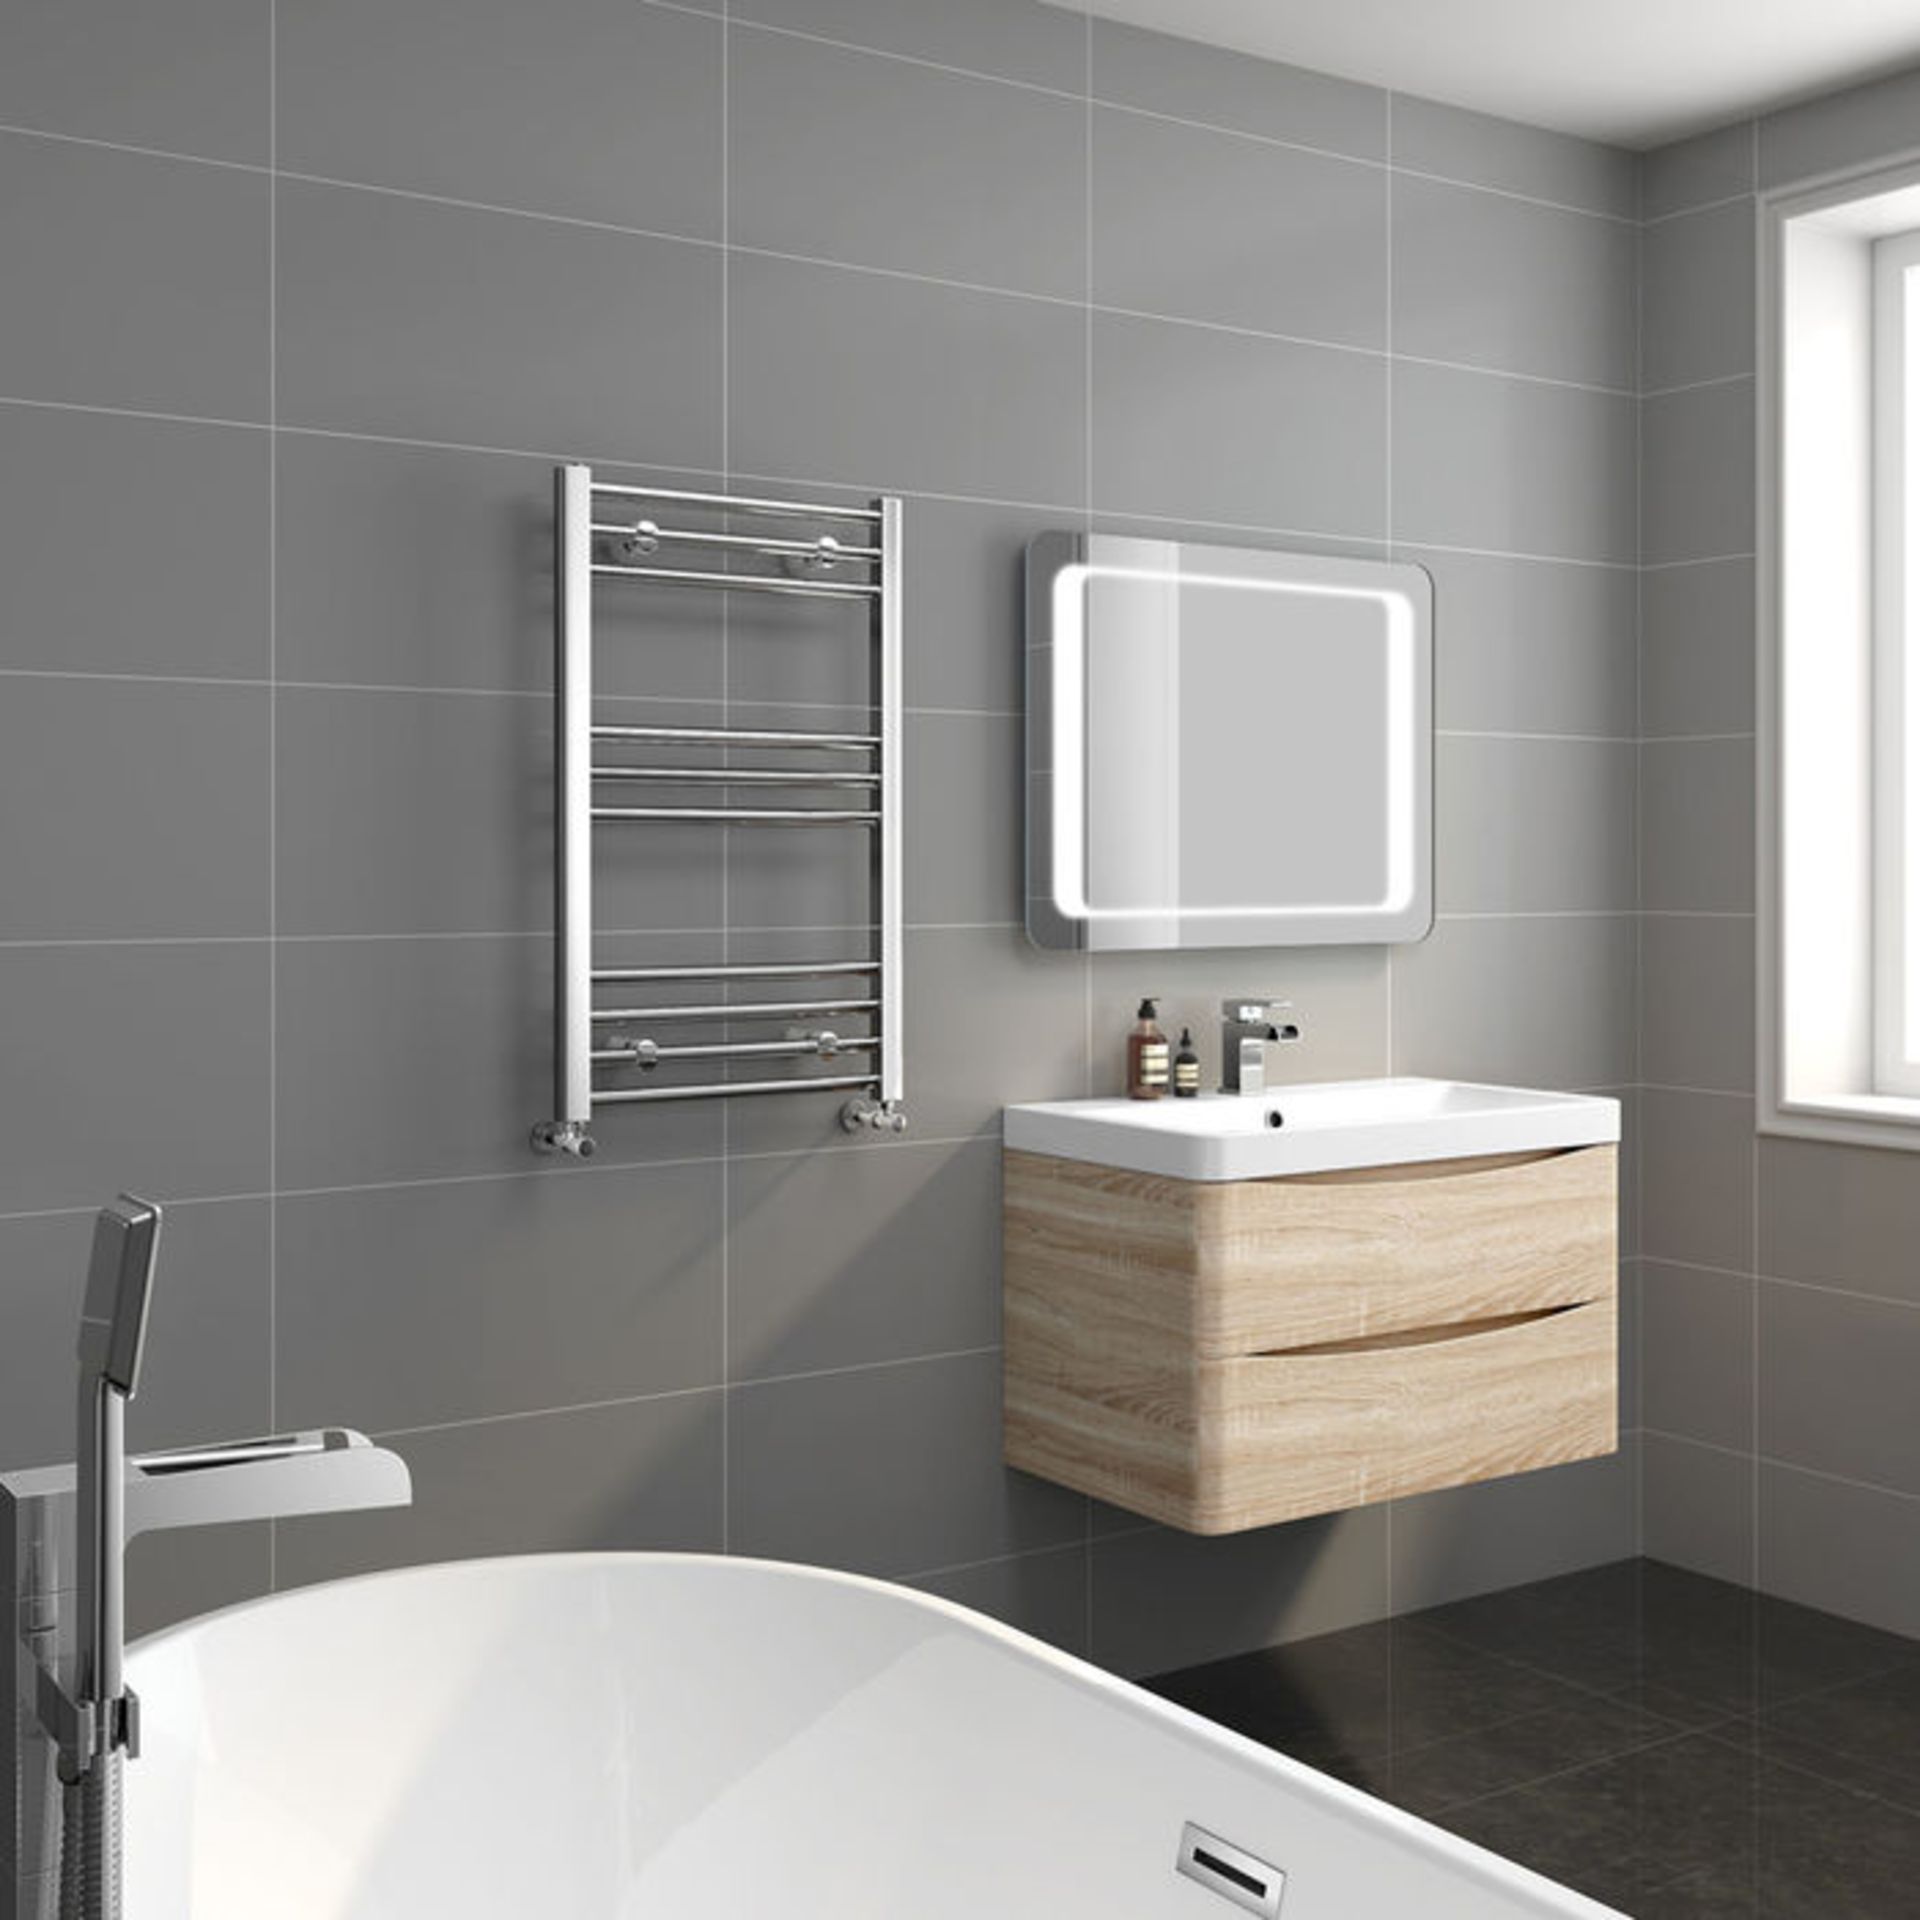 (V66) 800x500mm - 20mm Tubes - Chrome Heated Straight Rail Ladder Towel Radiator Low carbon steel - Image 2 of 3